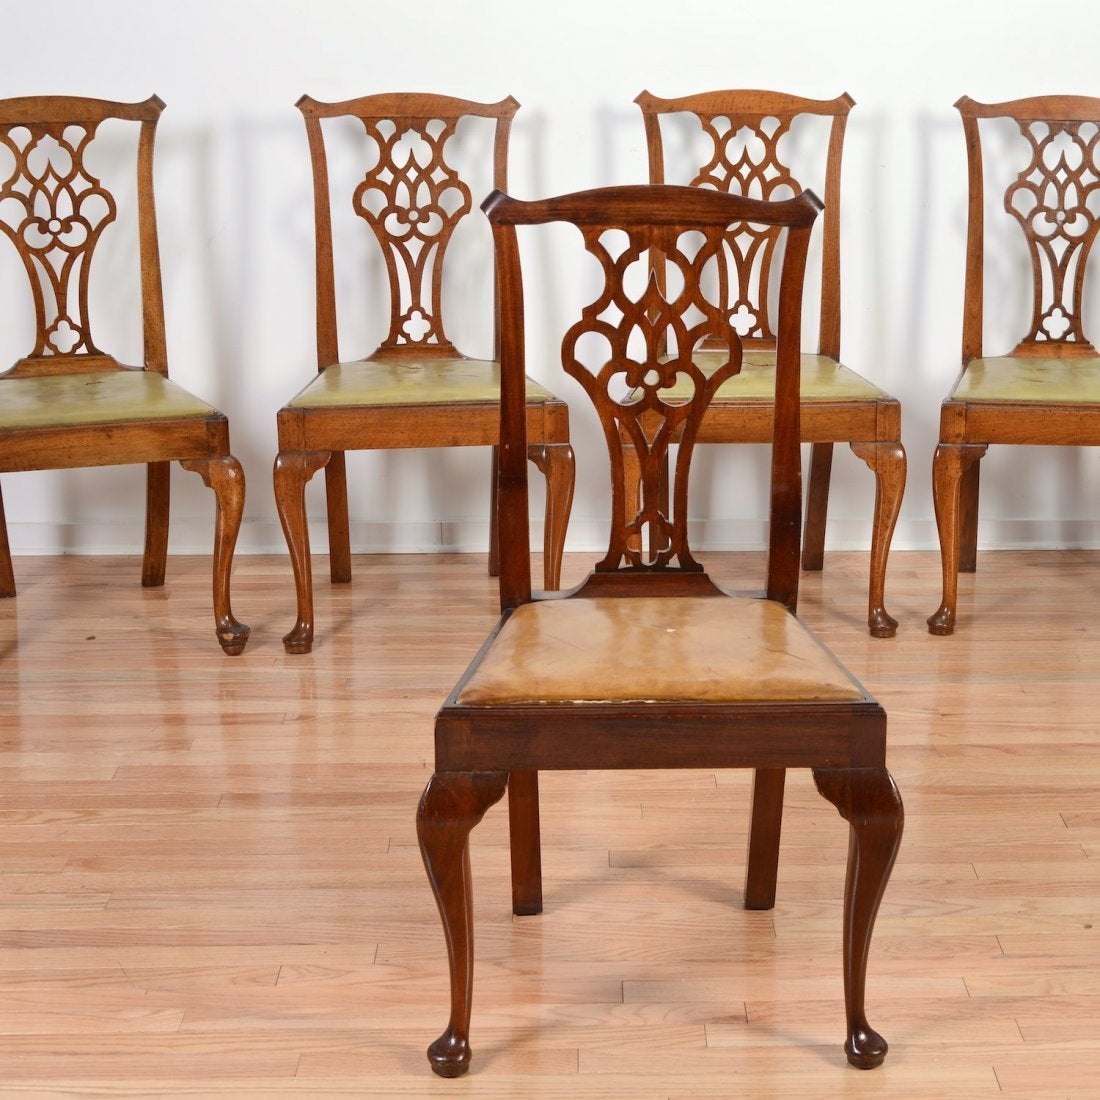 Set of Twelve George III Carved Mahogany Dining Chairs, Early 18th Century.  All side chairs, brown leather slip seats.  Leather seats will be replaced with leather of your color choice at no additional cost